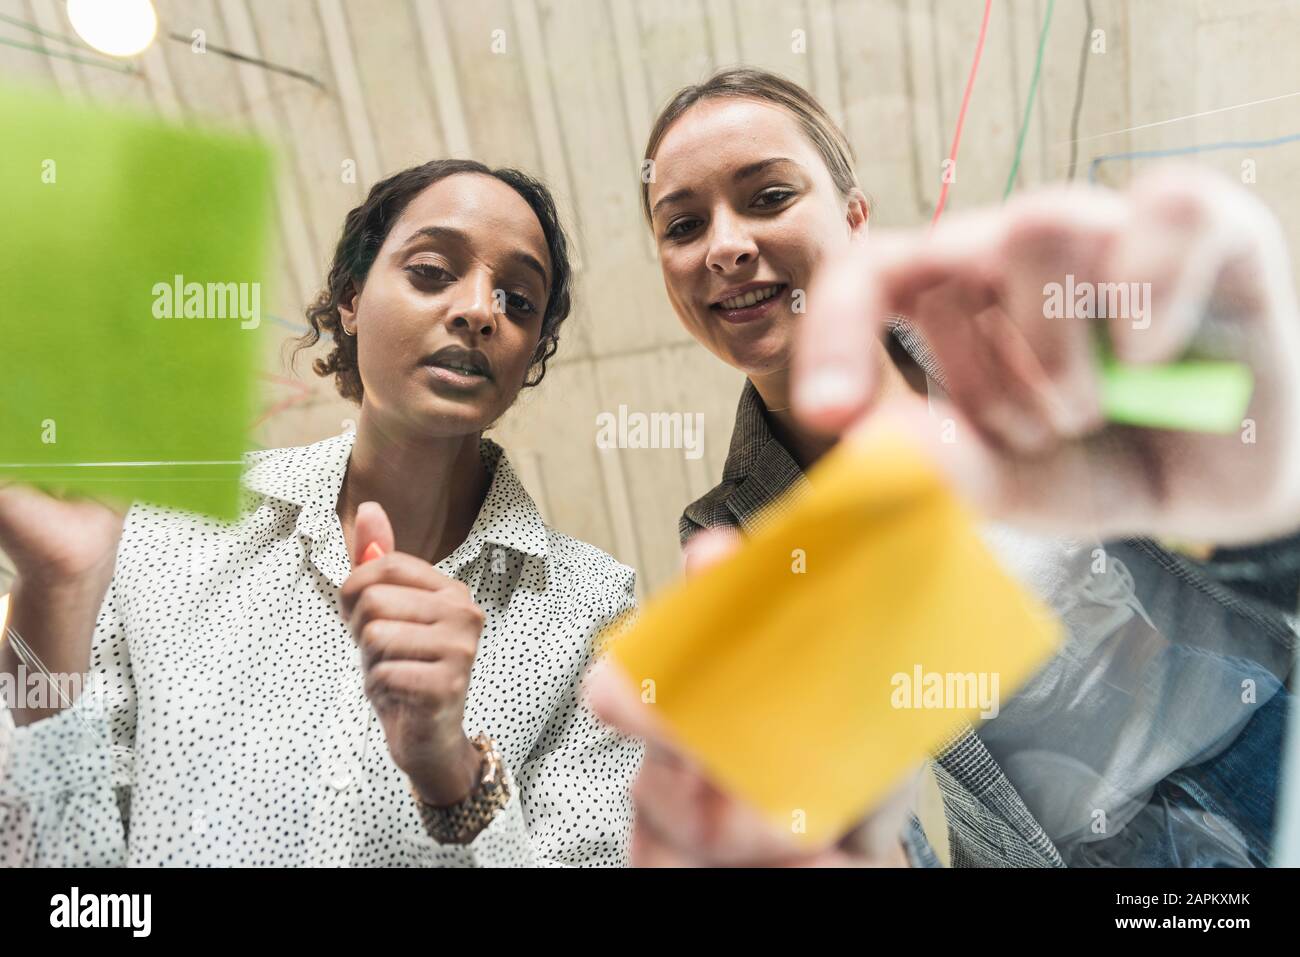 Two young businesswomen working on adhesive notes on glass table Stock Photo